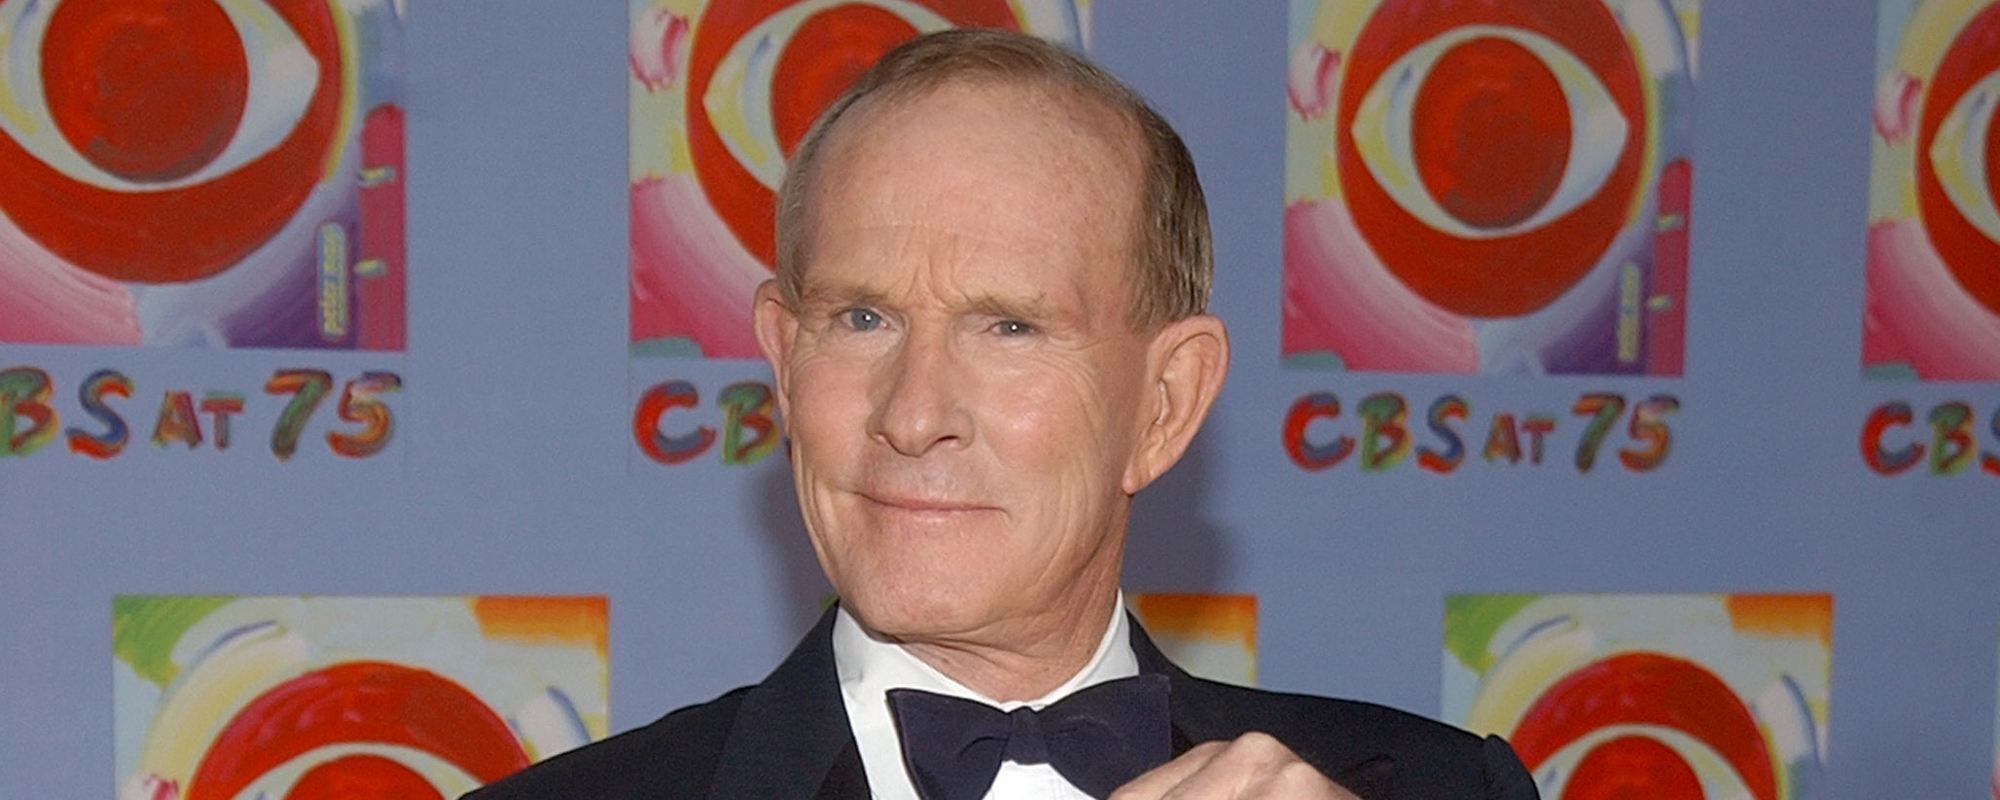 Tom Smothers, Half of the Comedic Music Duo Smothers Brothers, Dies at 86